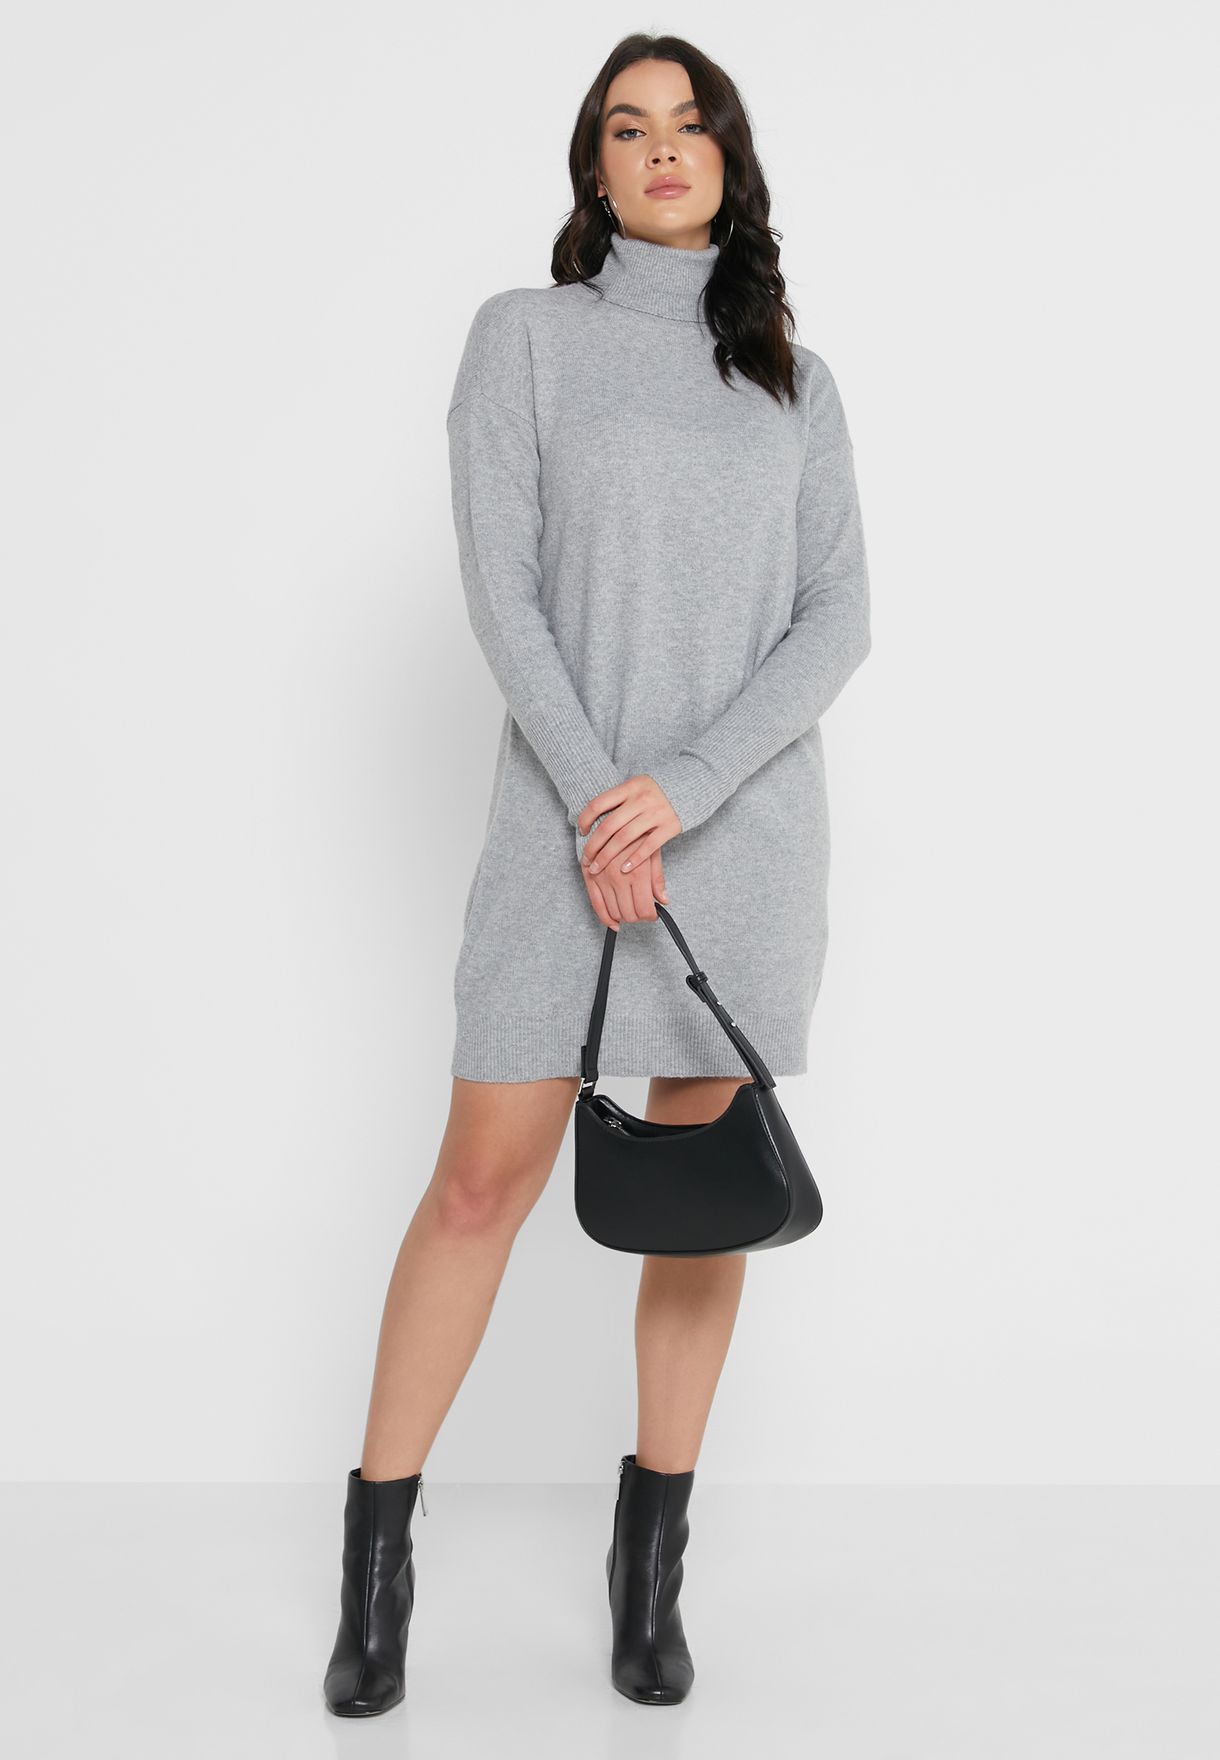 Roll Neck Knitted Dress